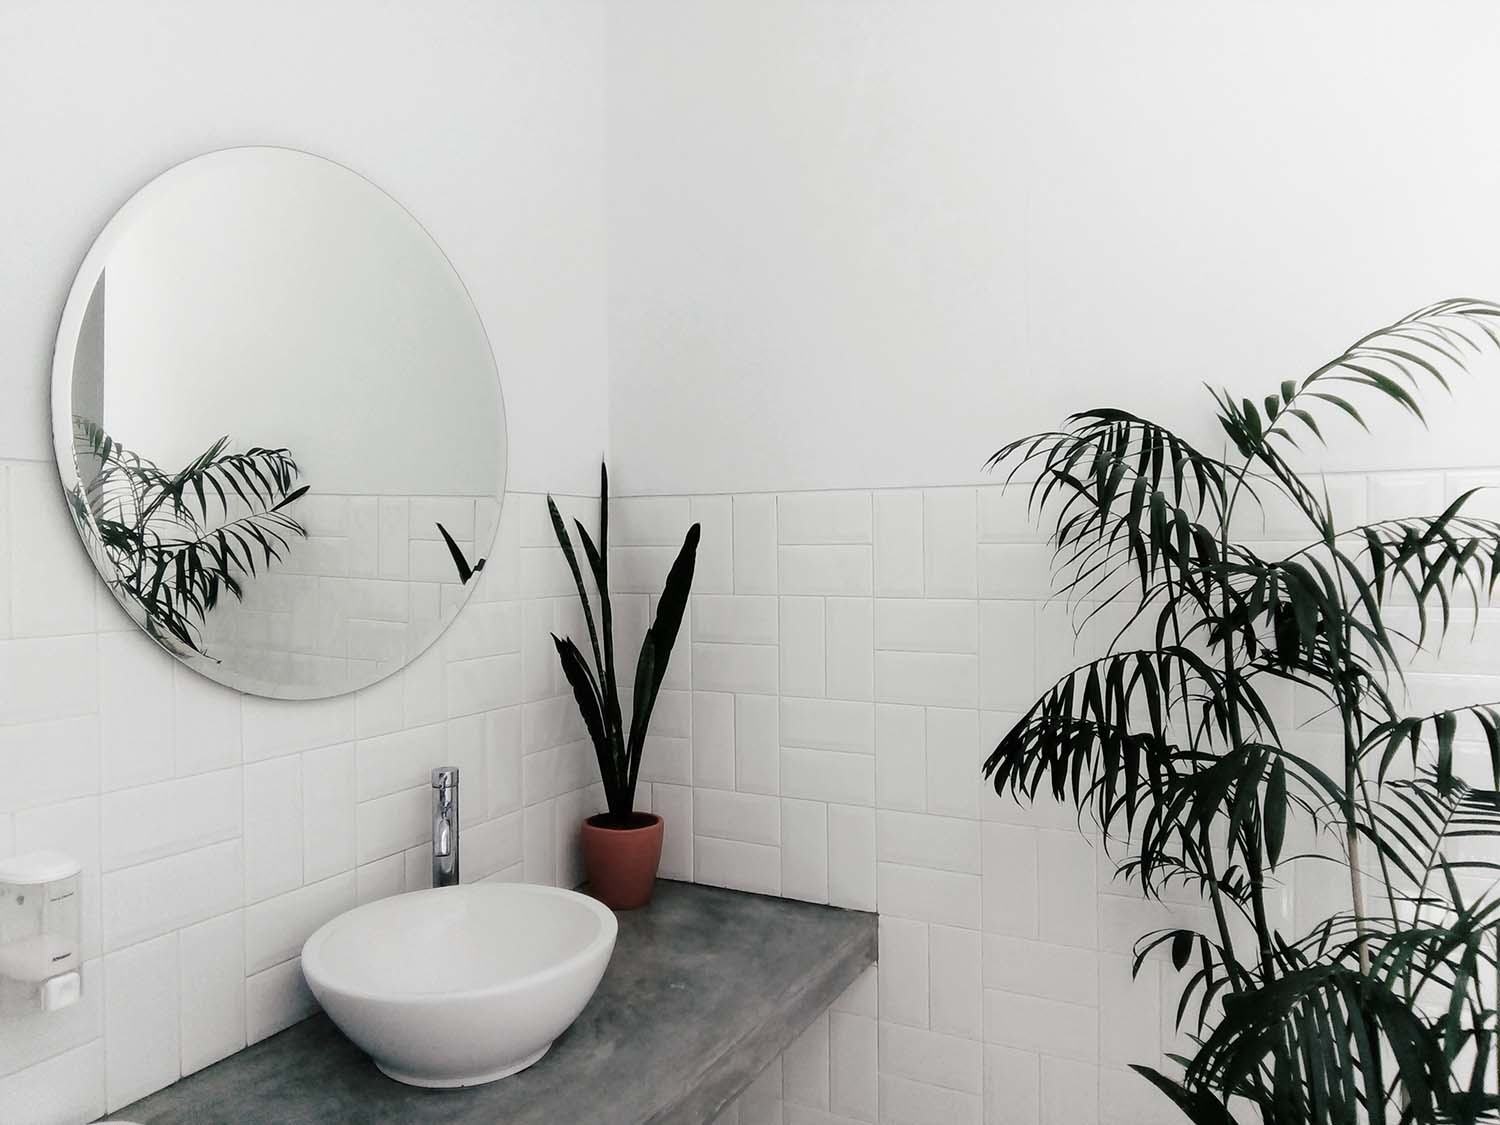 How To Make a Small Bathroom Look Bigger